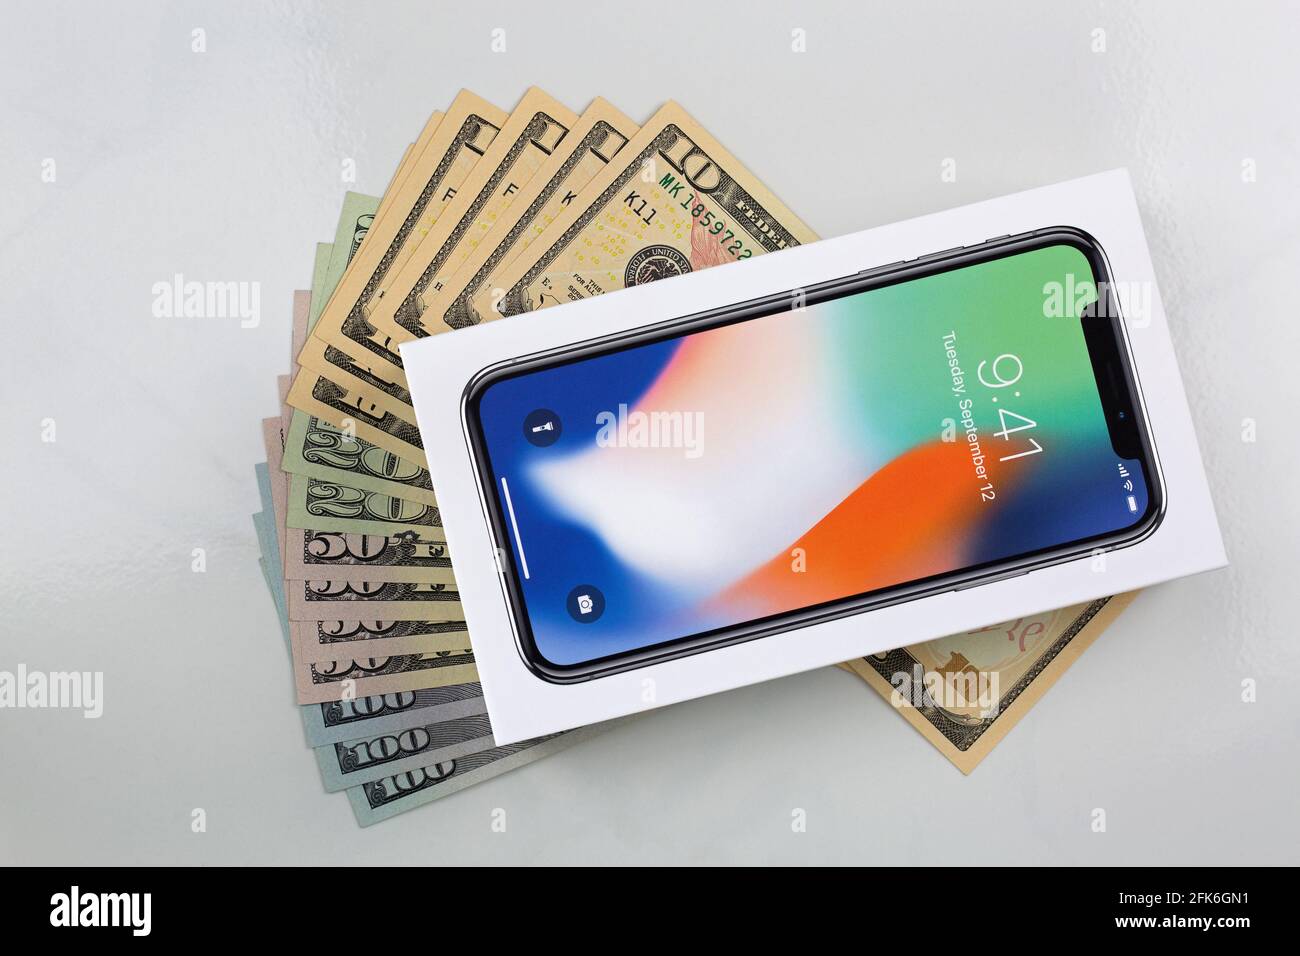 BANGKOK, THAILAND - JANUARY 2018 : Box of new iPhone X (iPhone 10) on American banknote money on marble background on January 17, 2018 in Bangkok, Tha Stock Photo